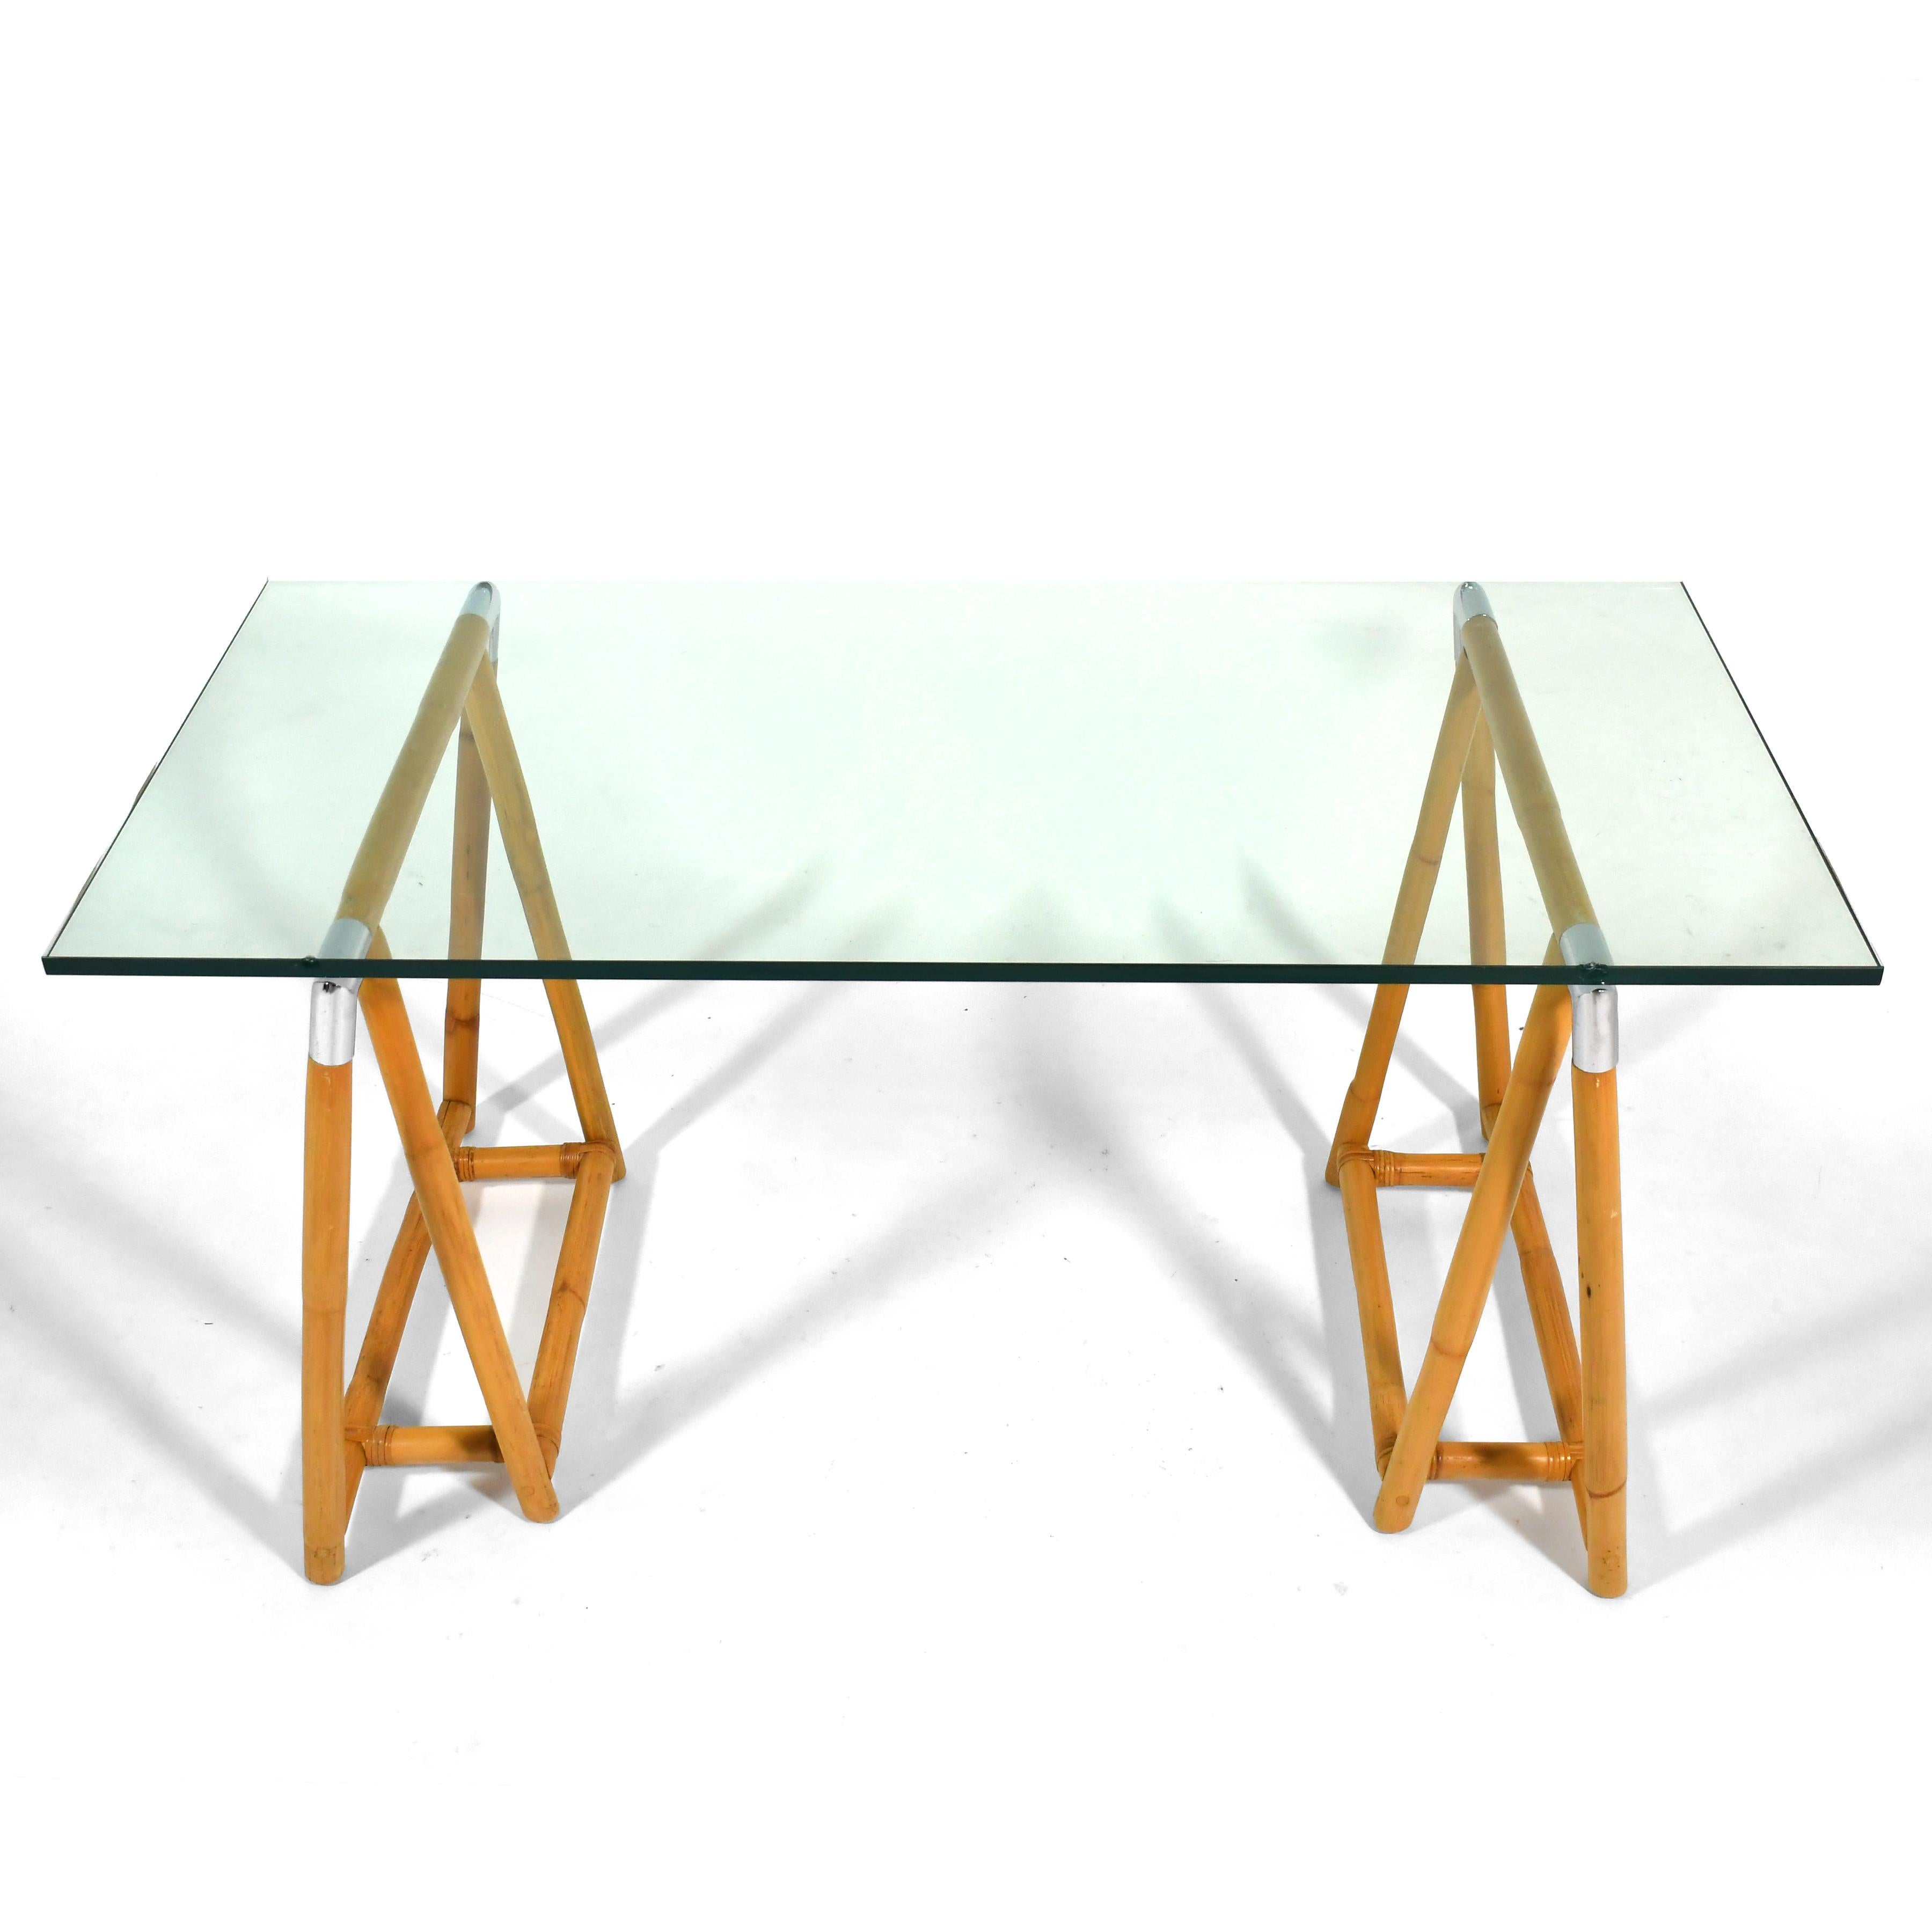 Plated Rattan & Chrome Sawhorse Table / Desk Bases For Sale